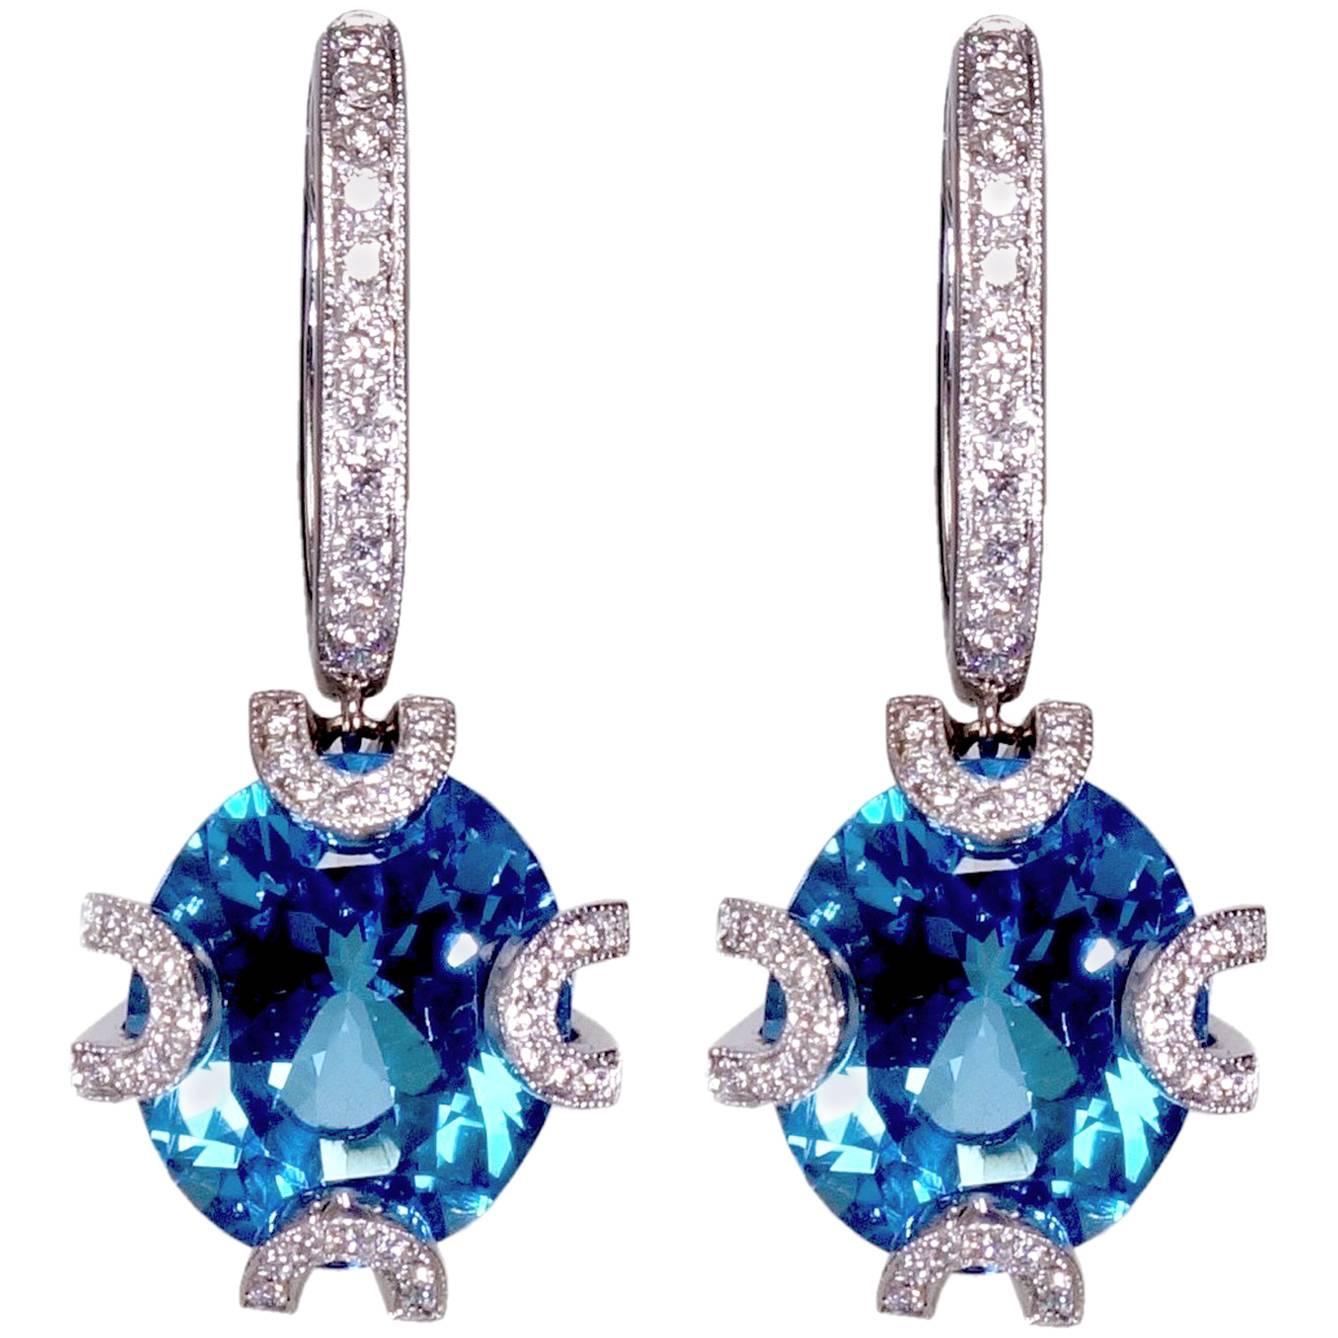 Highly Crafted 18K Gold Diamond Earrings with Electric Blue Zircon Color Stones For Sale